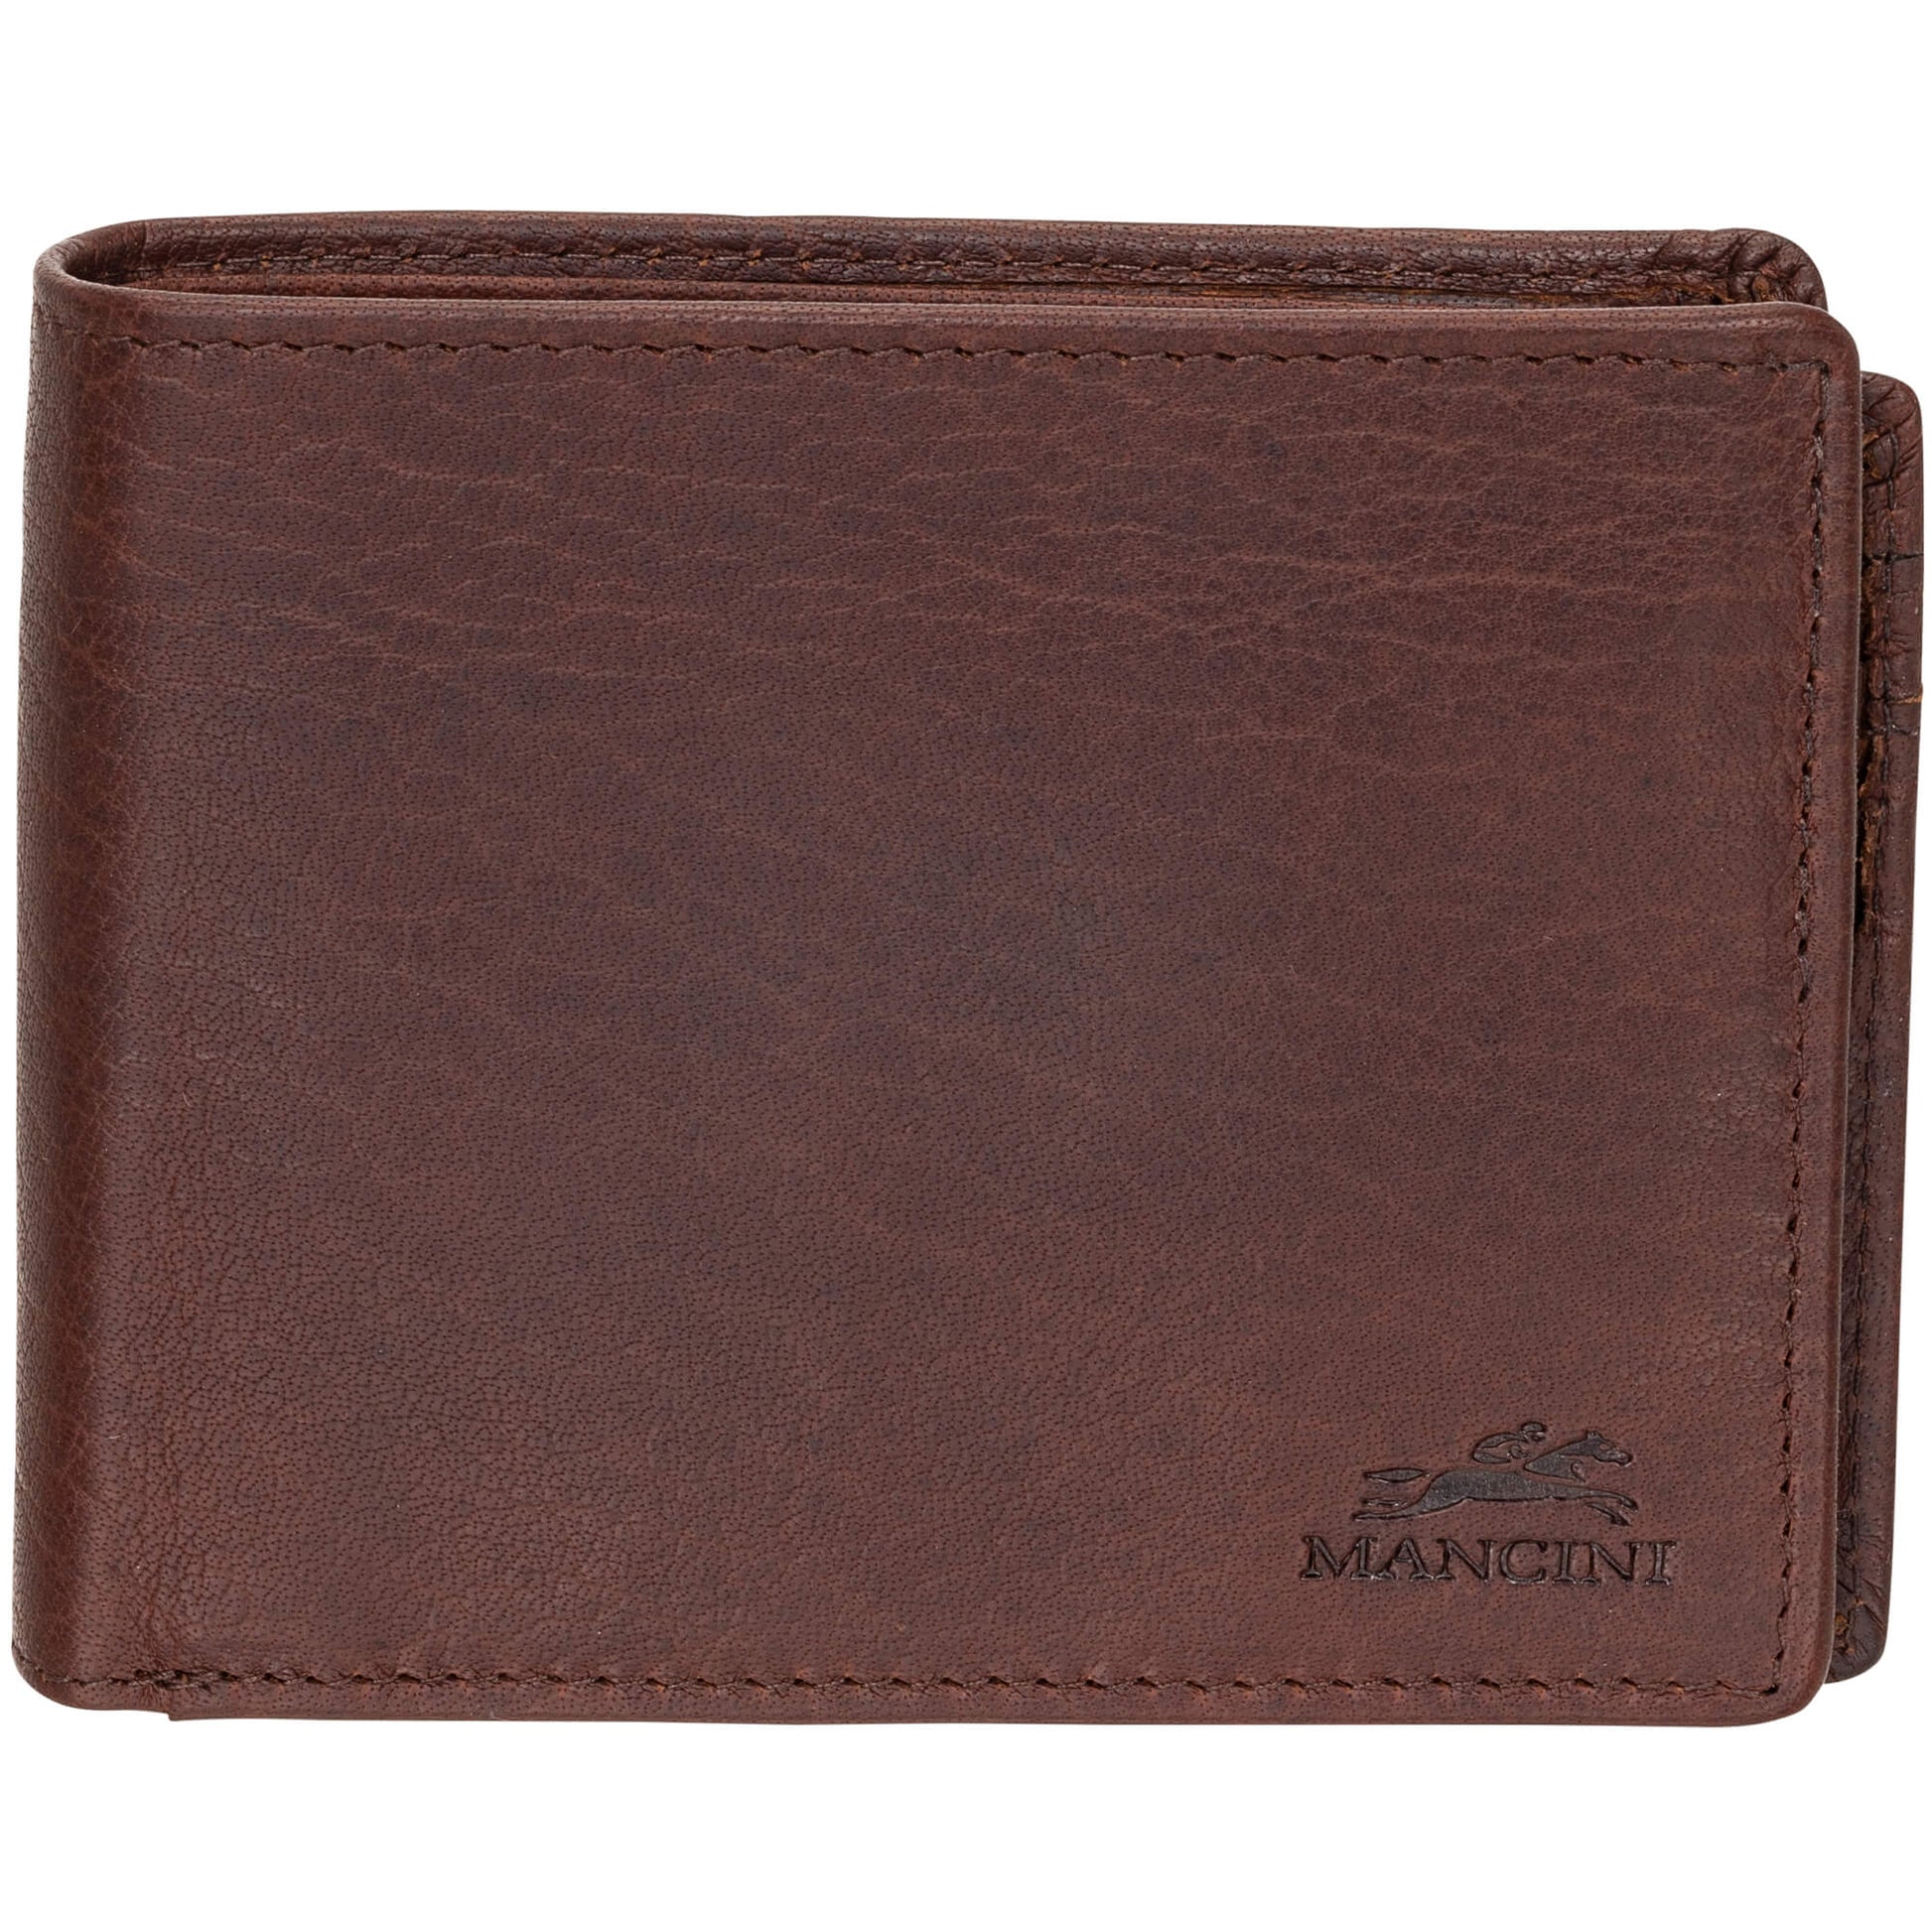 Mancini BUFFALO RFID Secure Center Wing Wallet with Coin Pocket - Brown